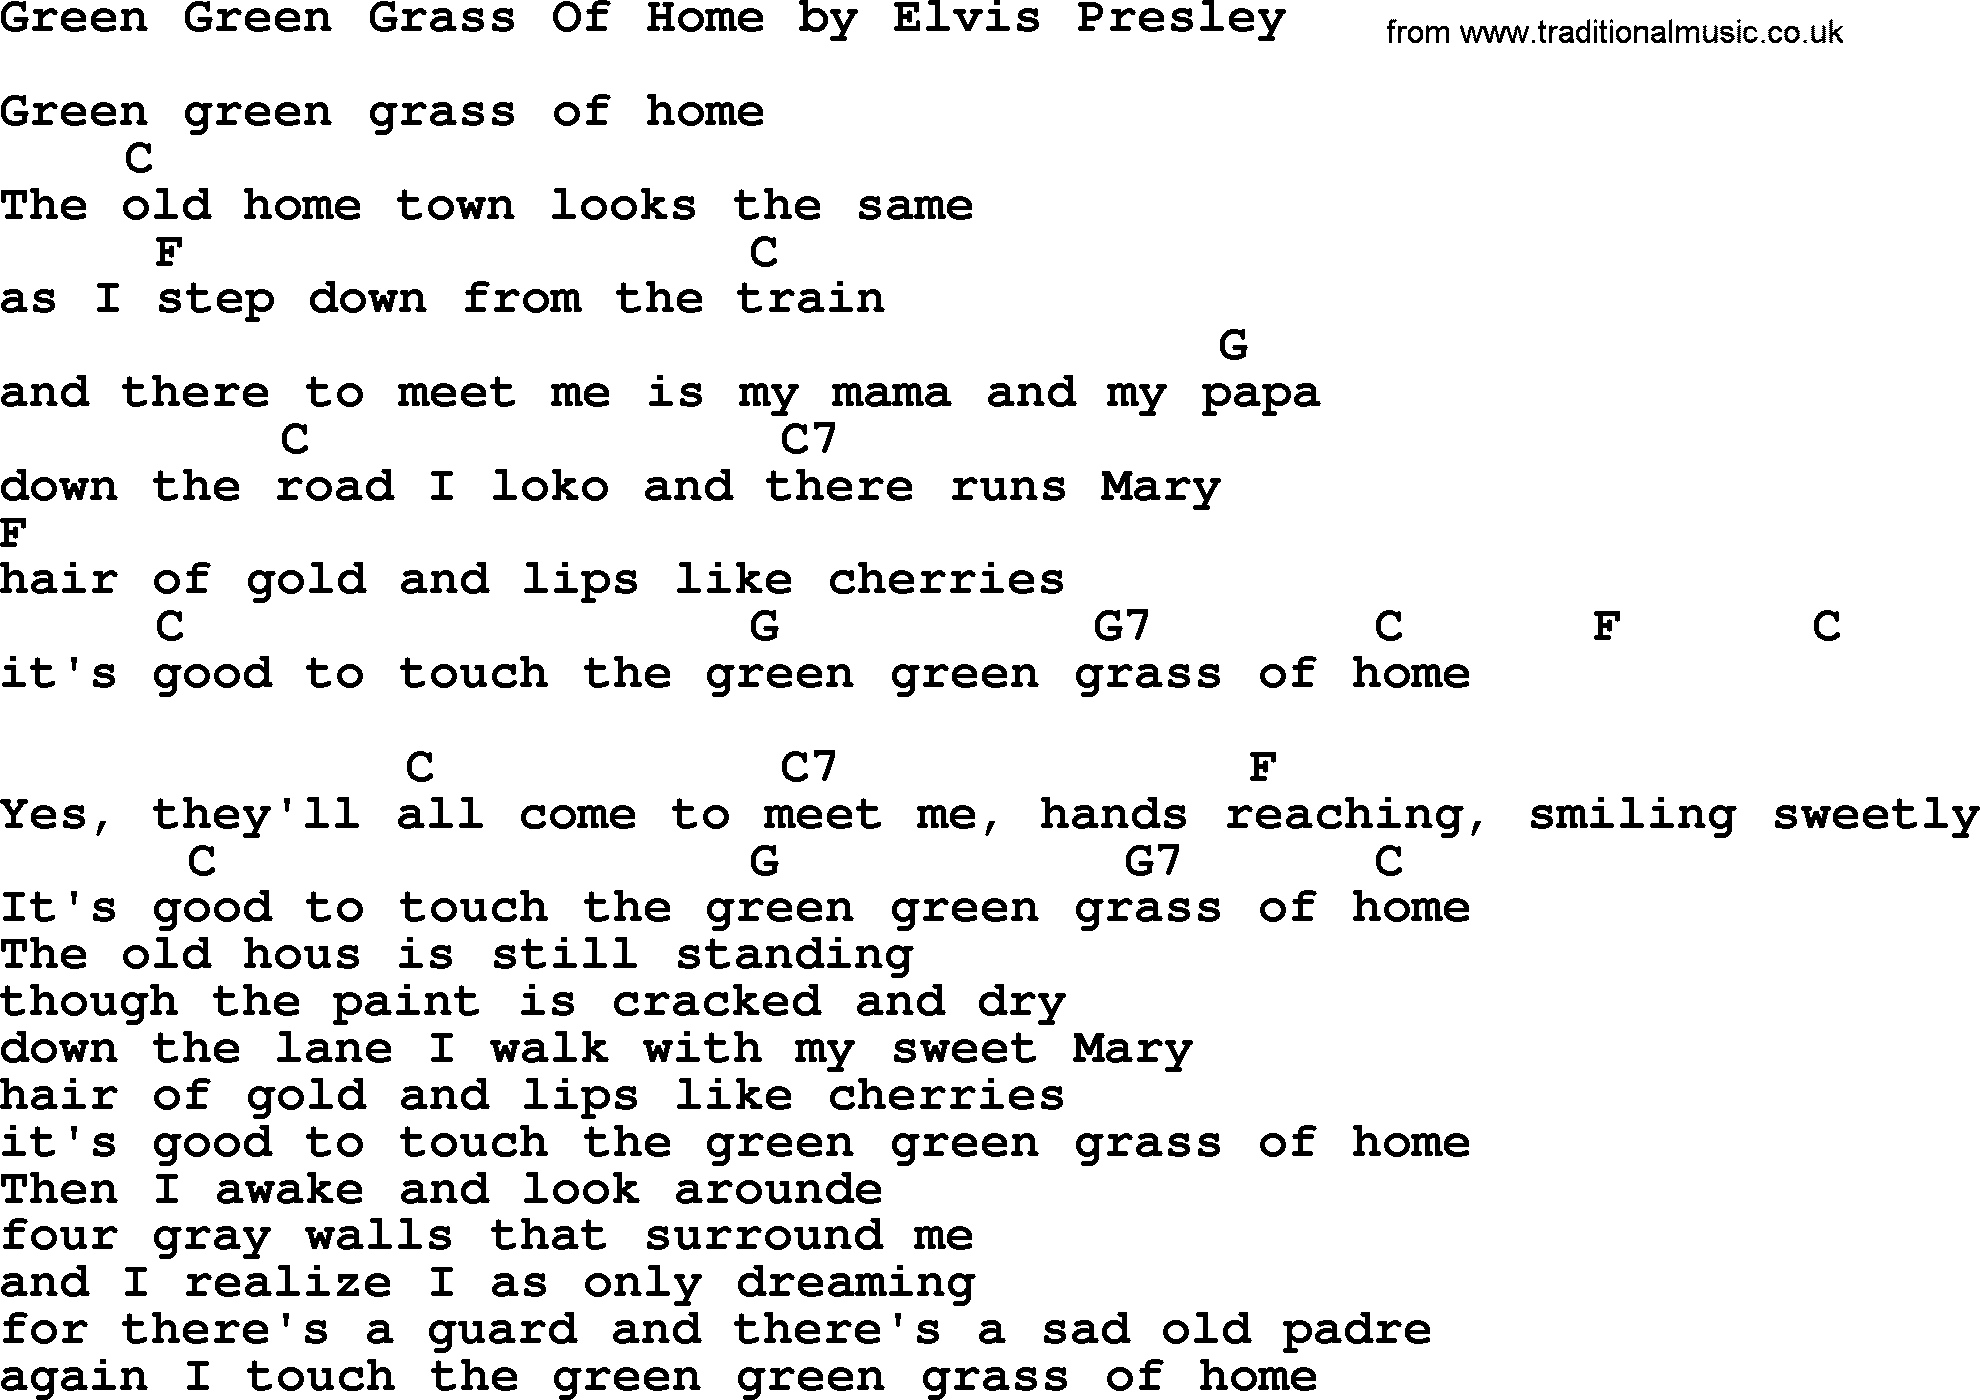 Elvis Presley song: Green Green Grass Of Home, lyrics and chords